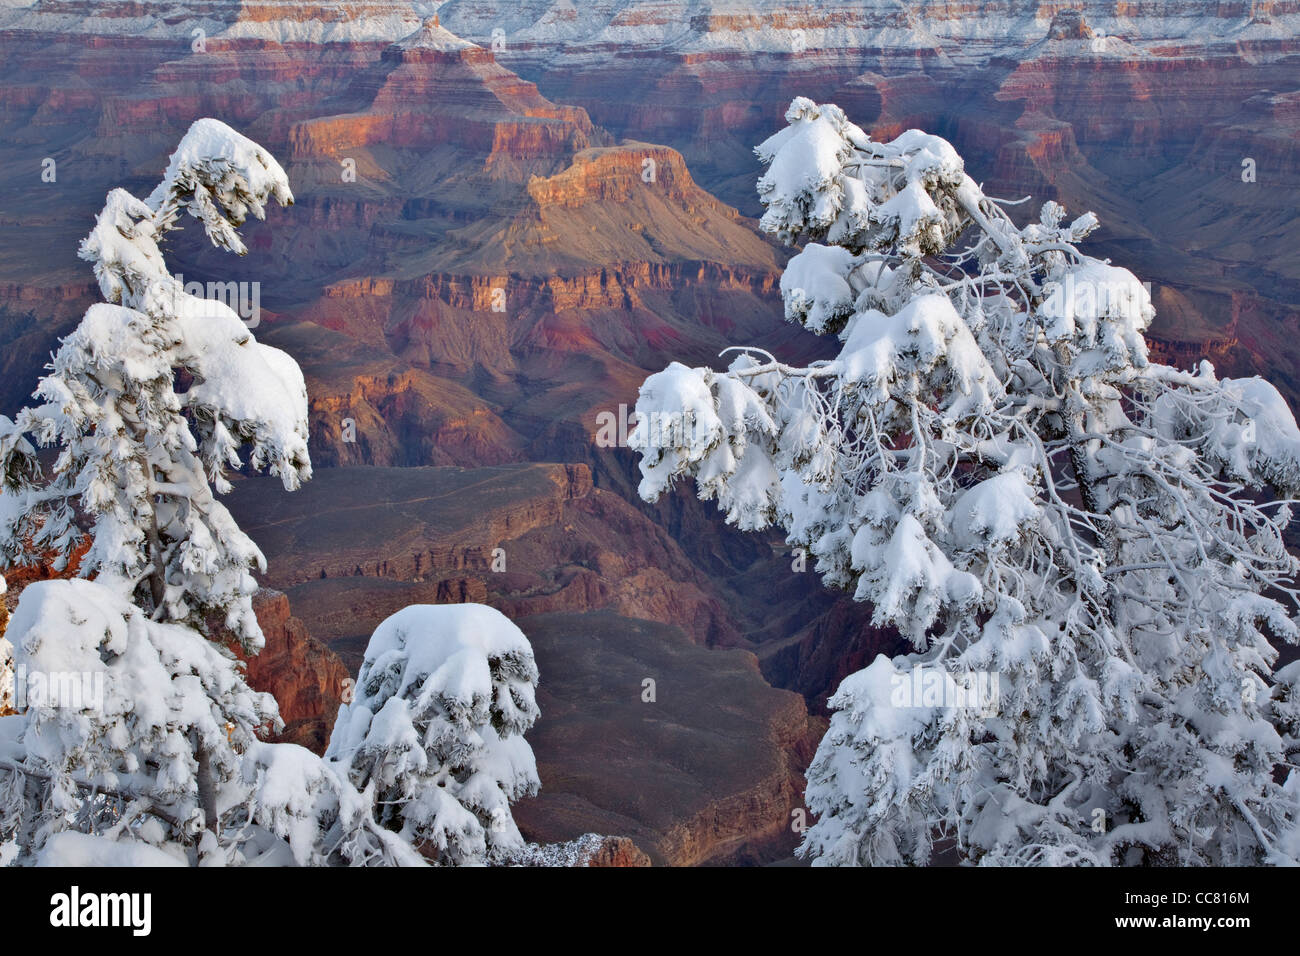 Winter view at Mather Point area on South Rim of Grand Canyon National Park, Arizona, USA Stock Photo